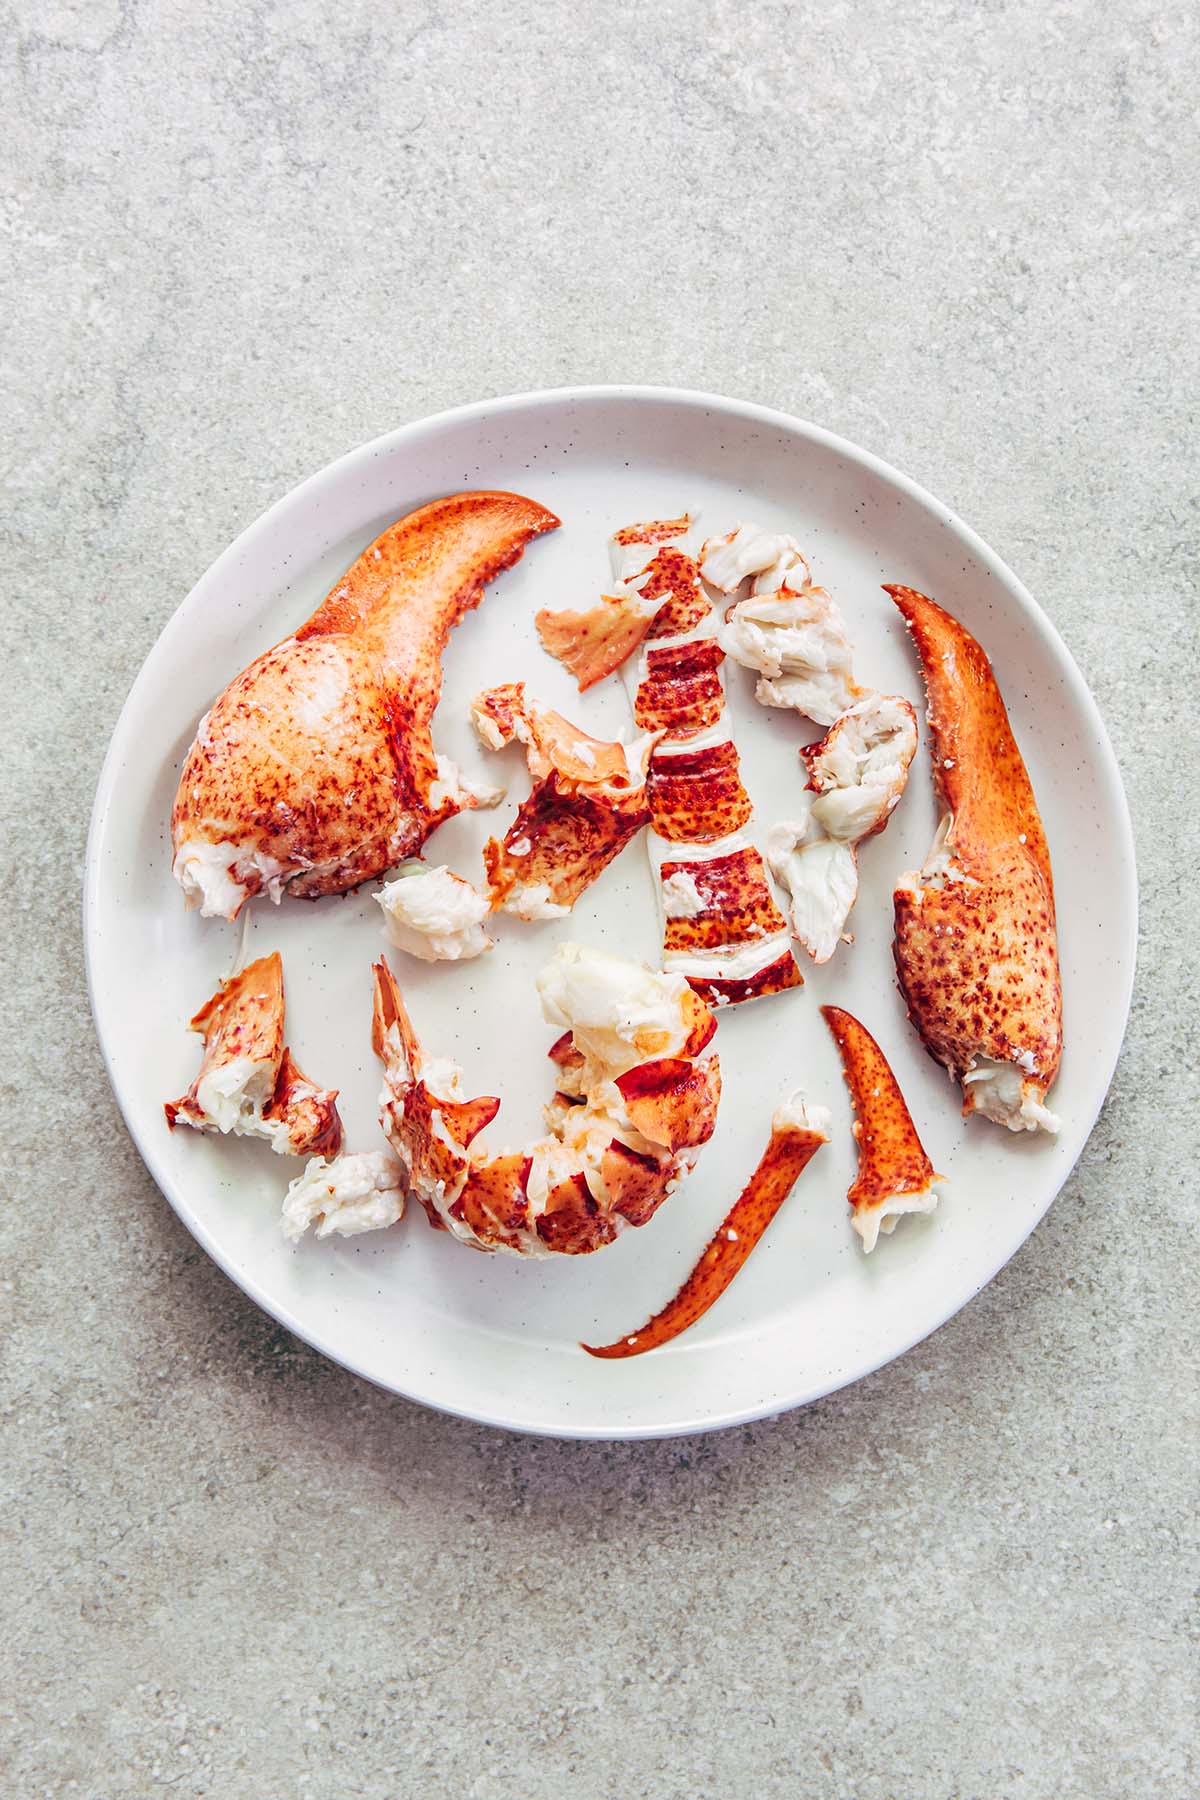 The cooked meat of a whole lobster removed from the shell, arranged on a white plate on a stone surface.